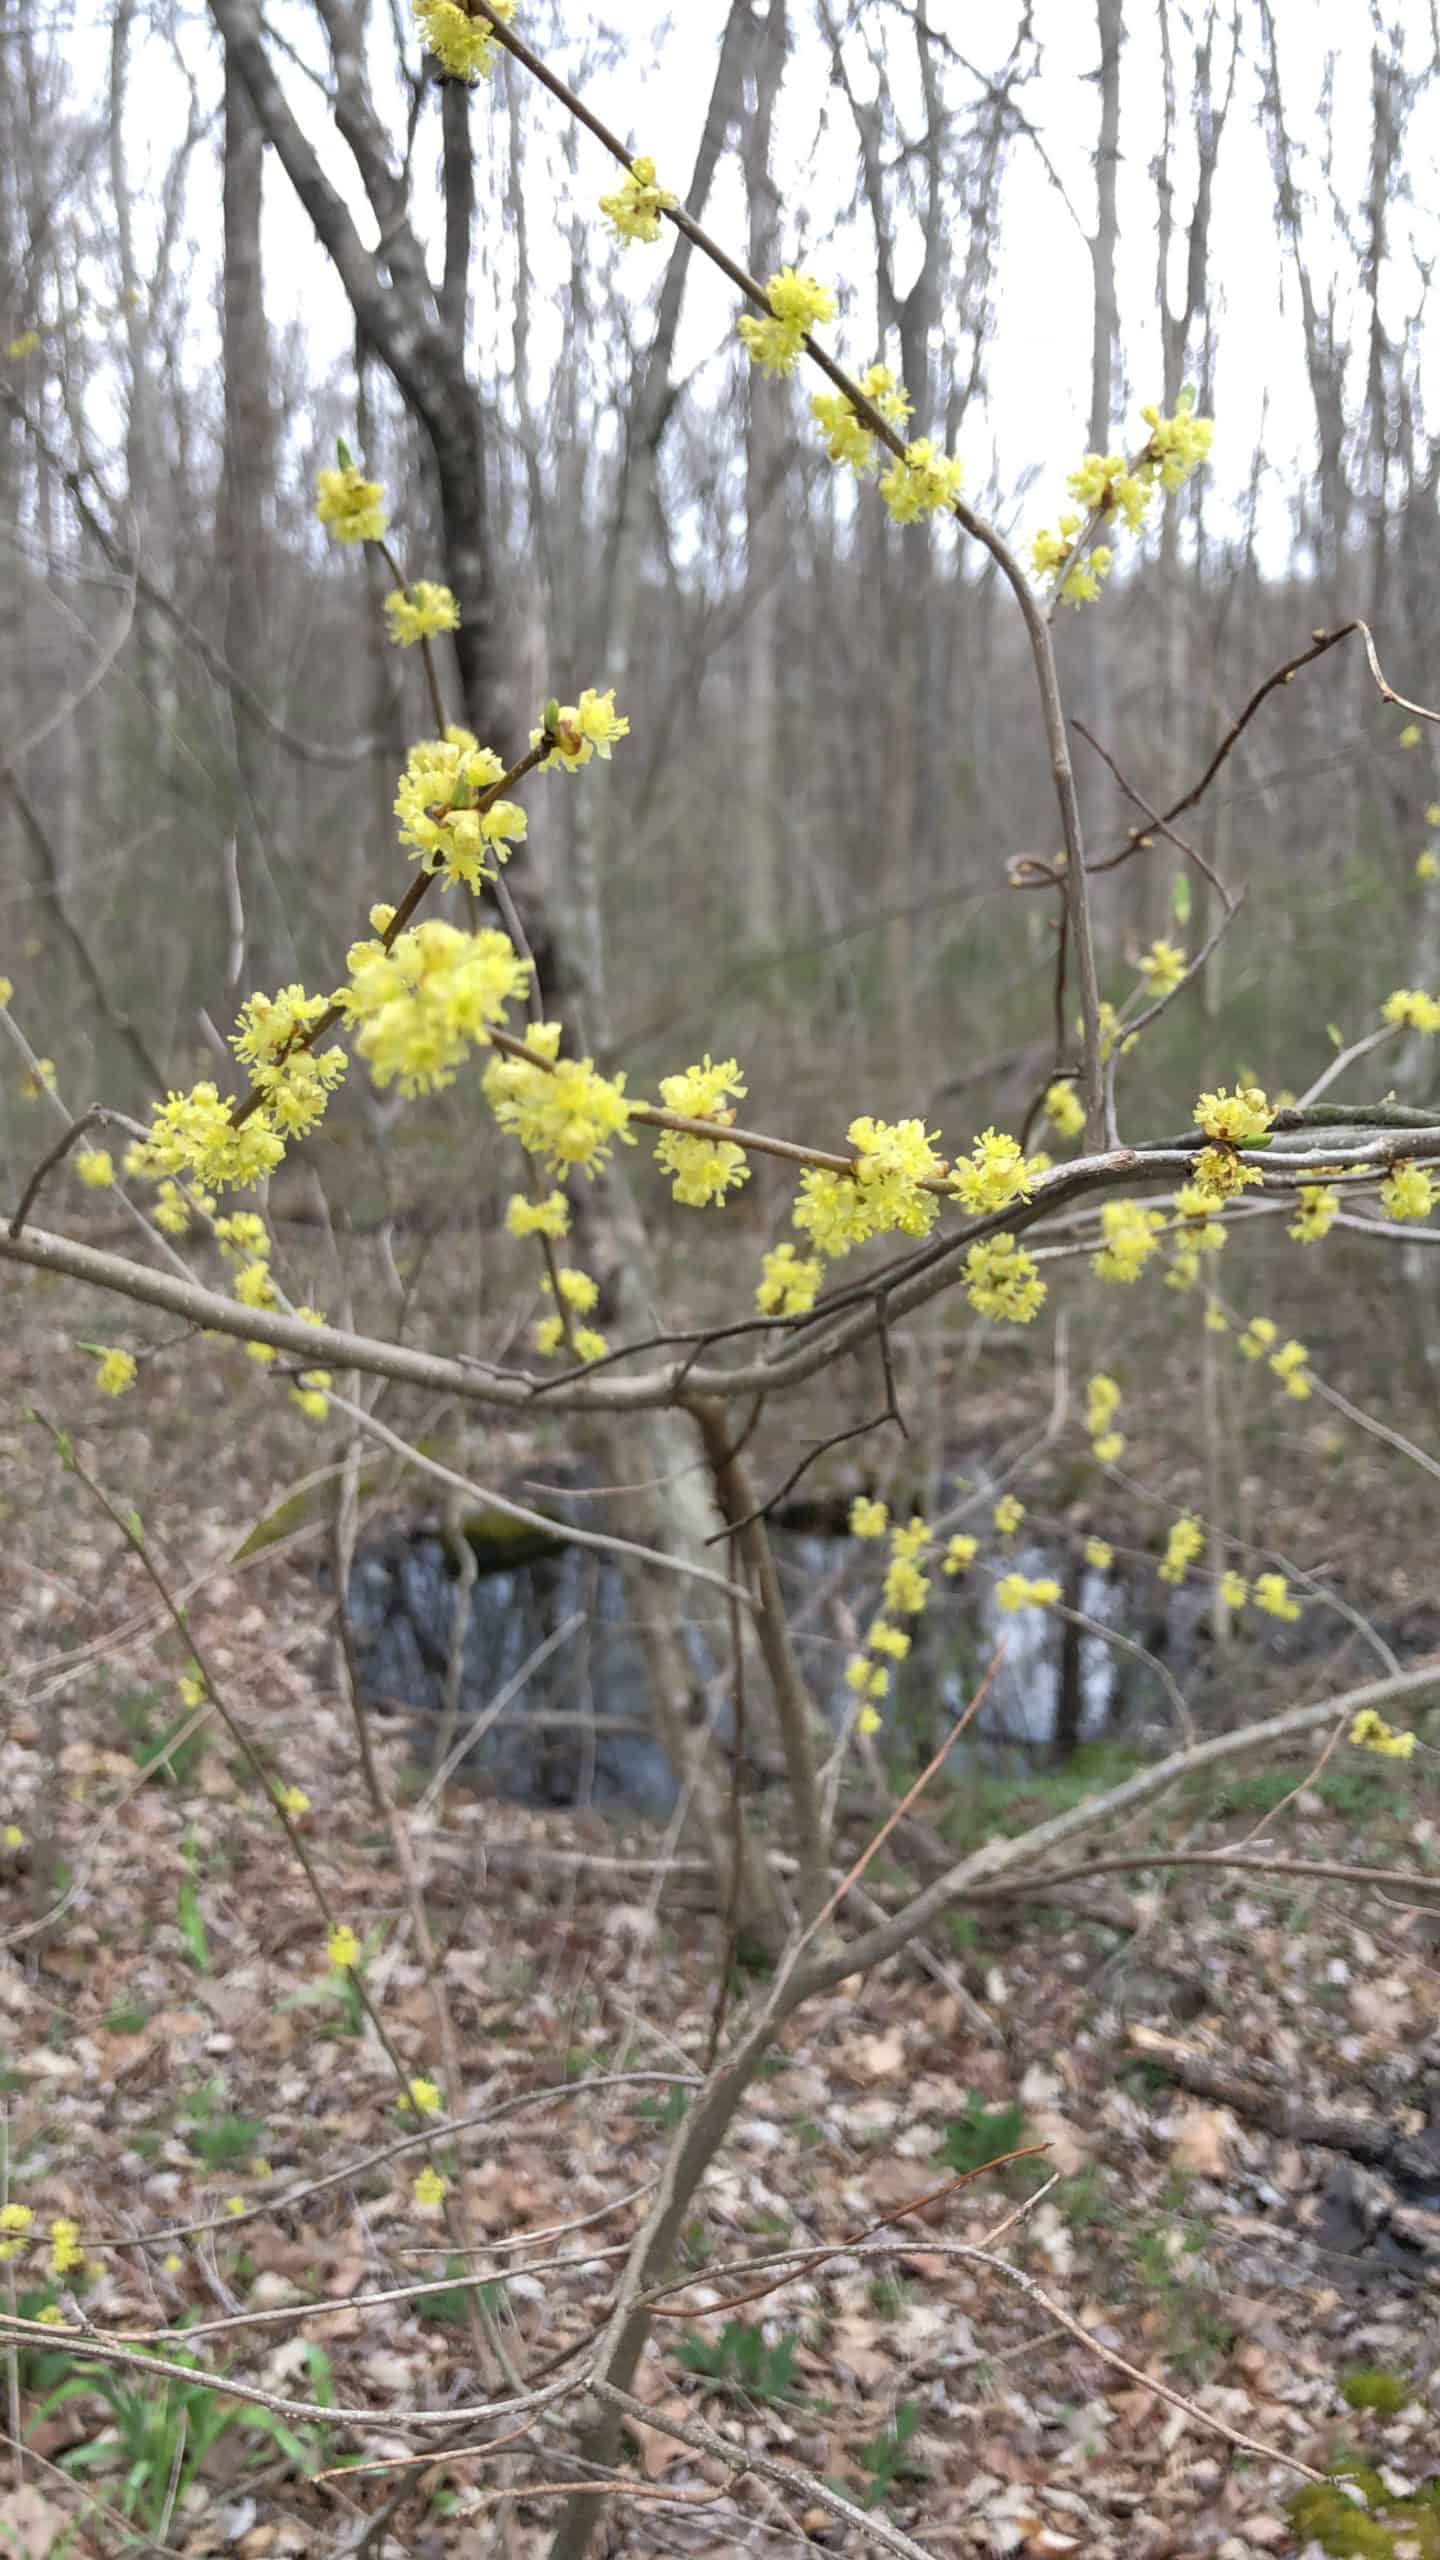 Spicebush flowers in the woods